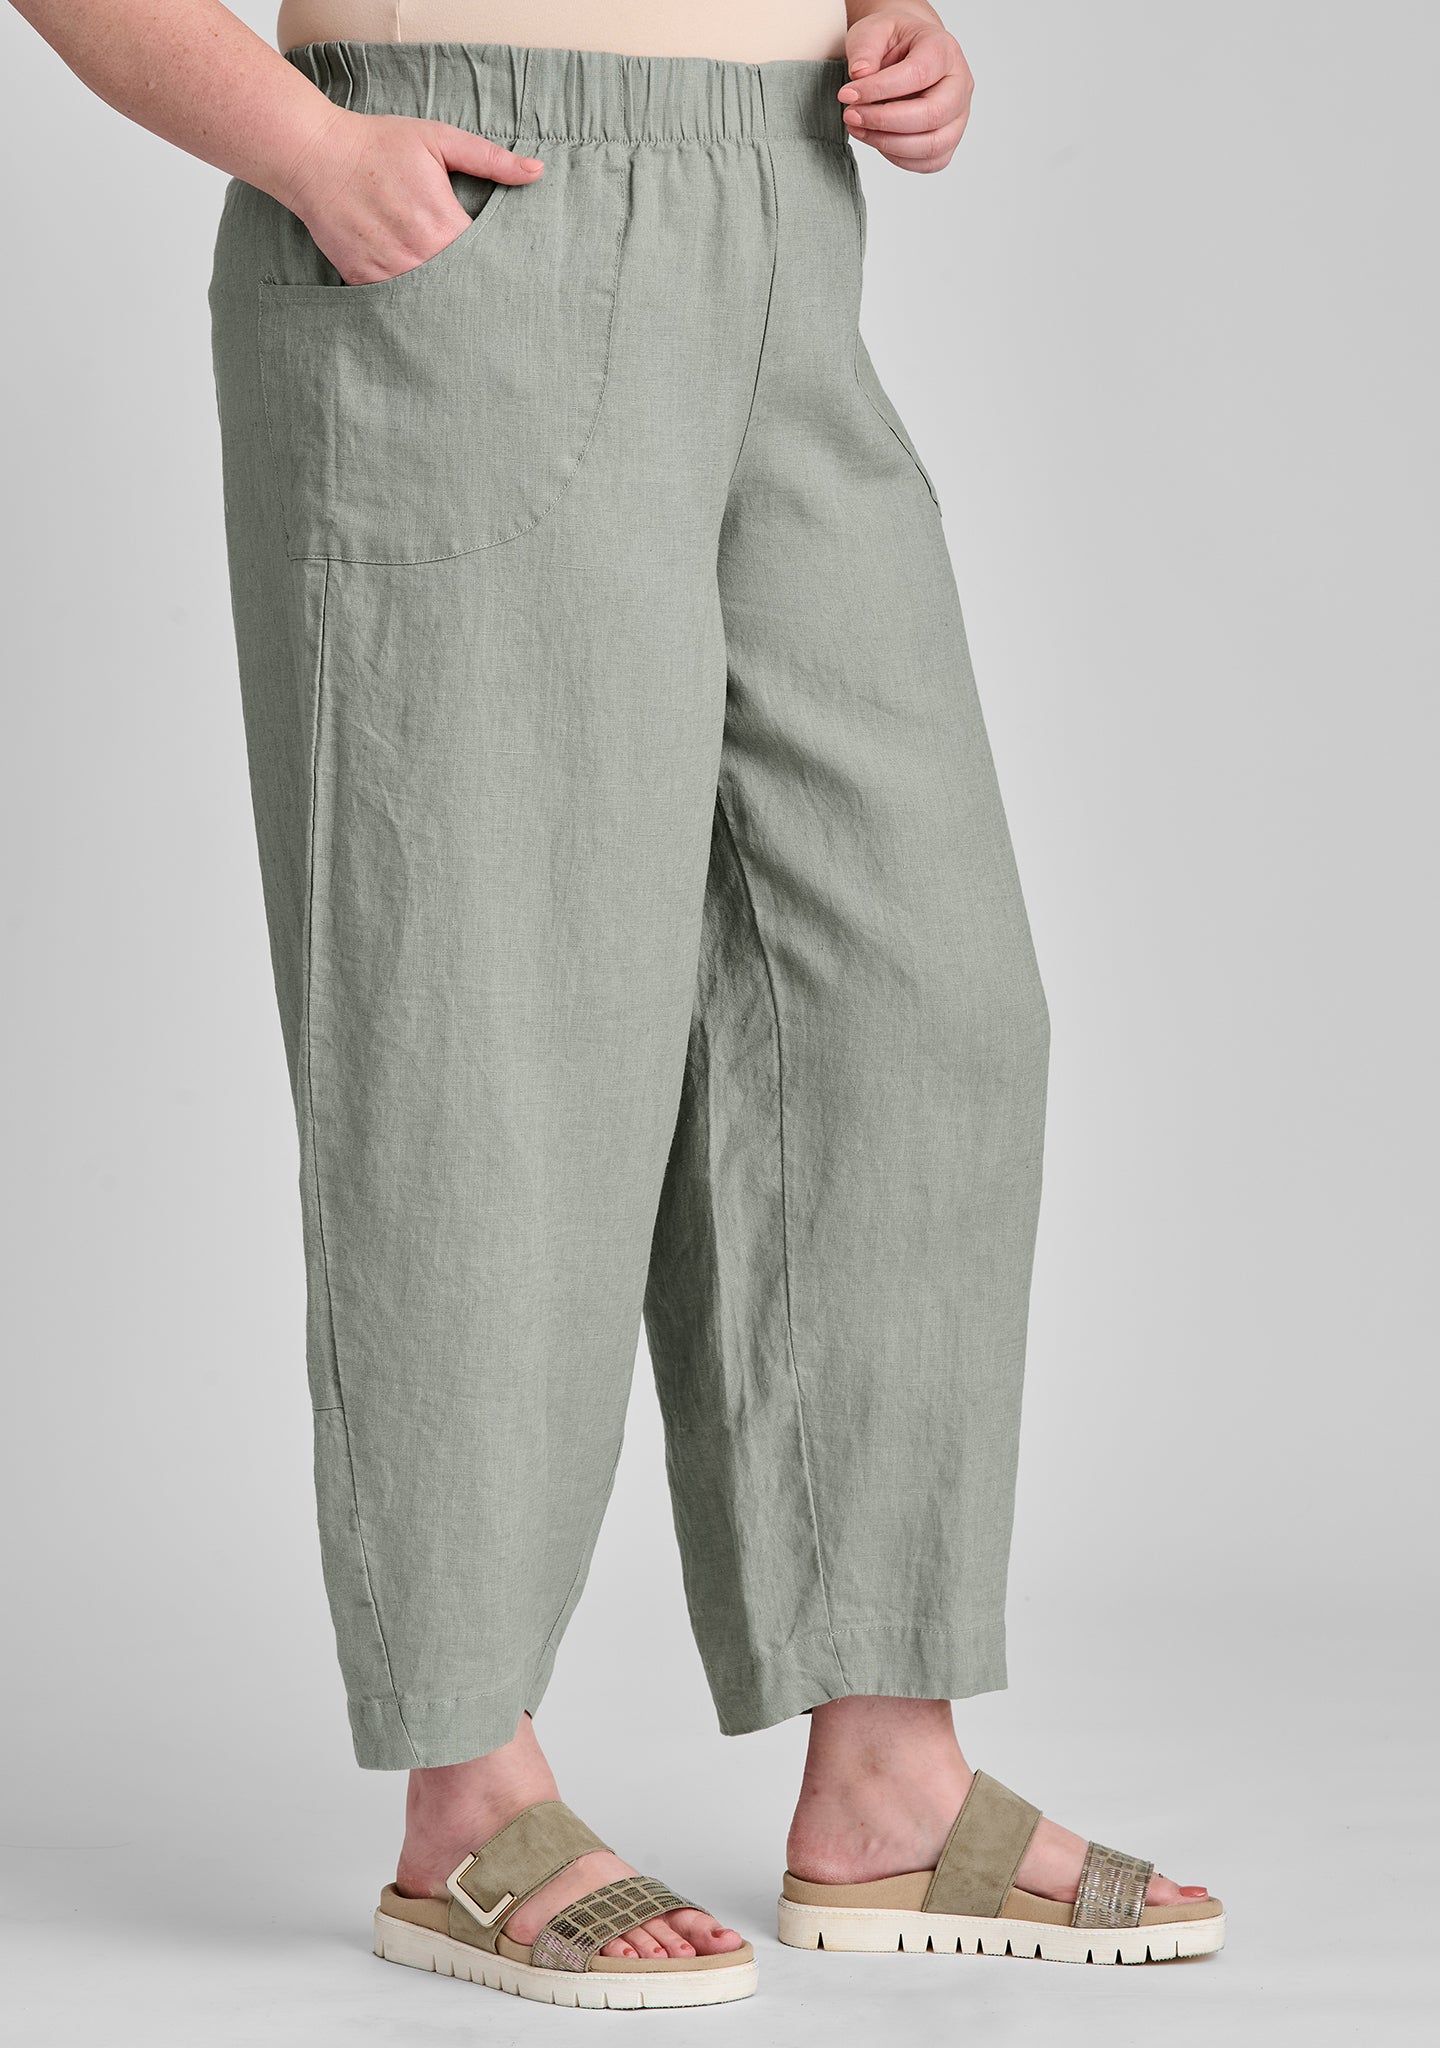 Brown Linen Pants. Flax Pants. Linen Trousers. Comfy Linen Trousers.  Classic Women Pants. 100% Pure Linen italy 